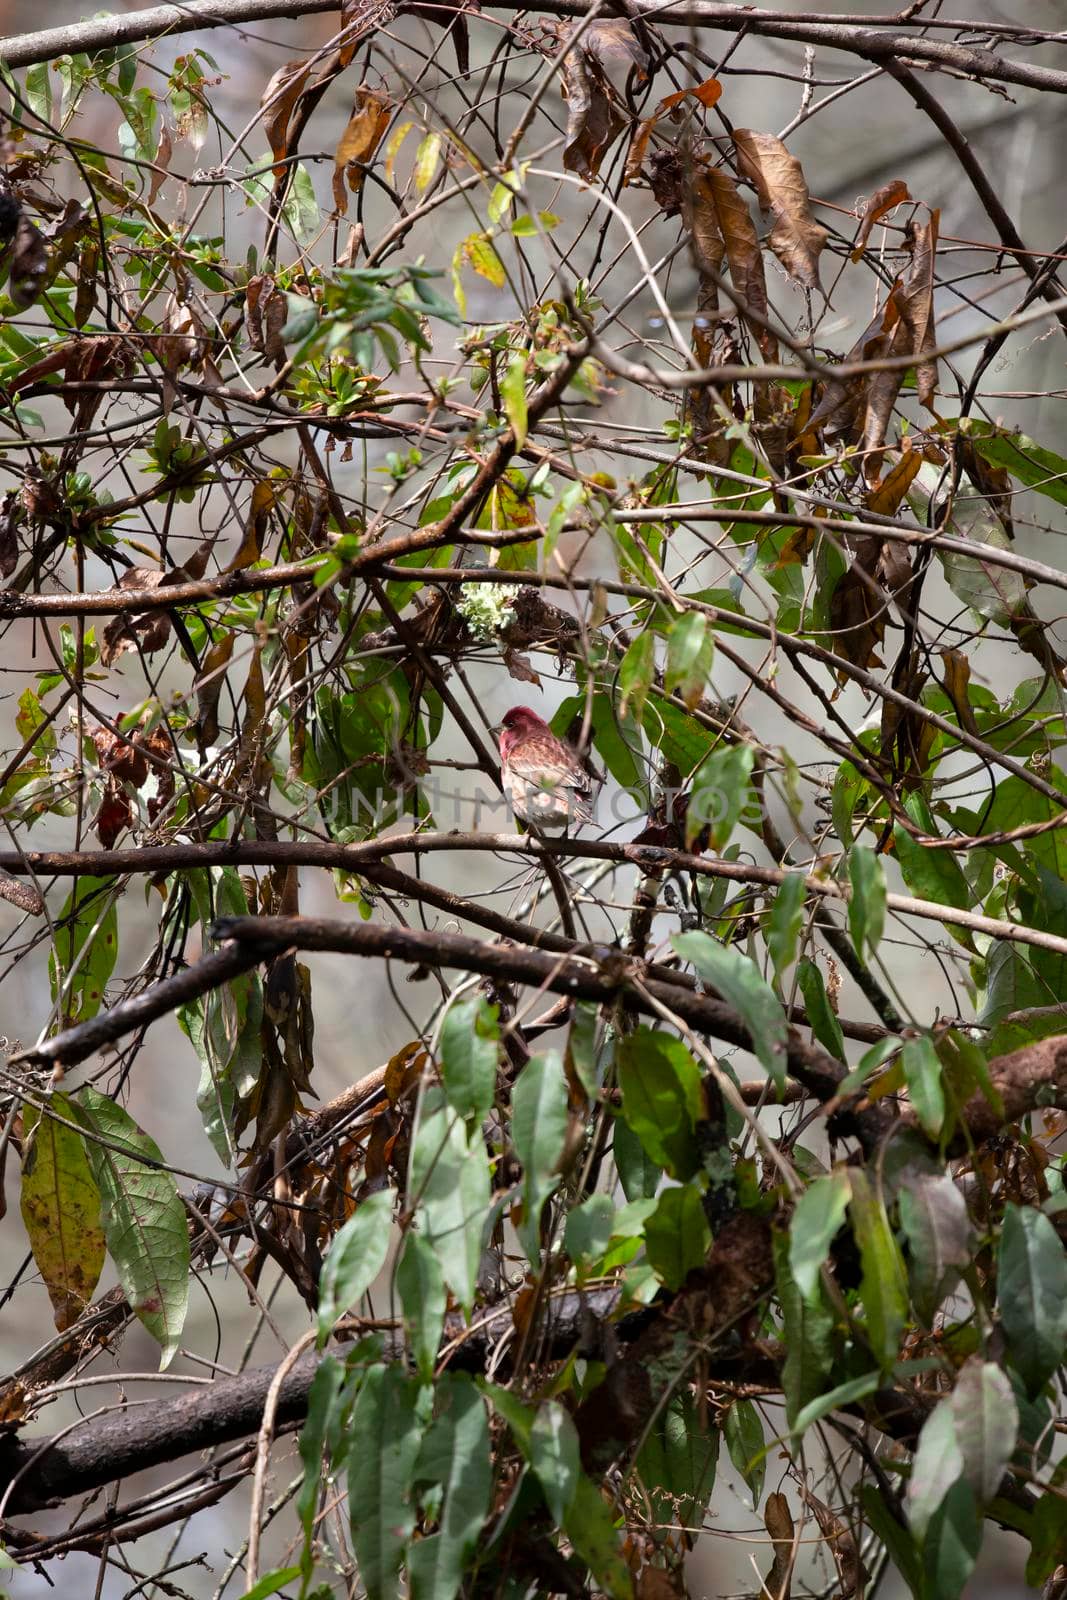 Male purple finch (Haemorhous purpureus) looking around while he forages from a bush